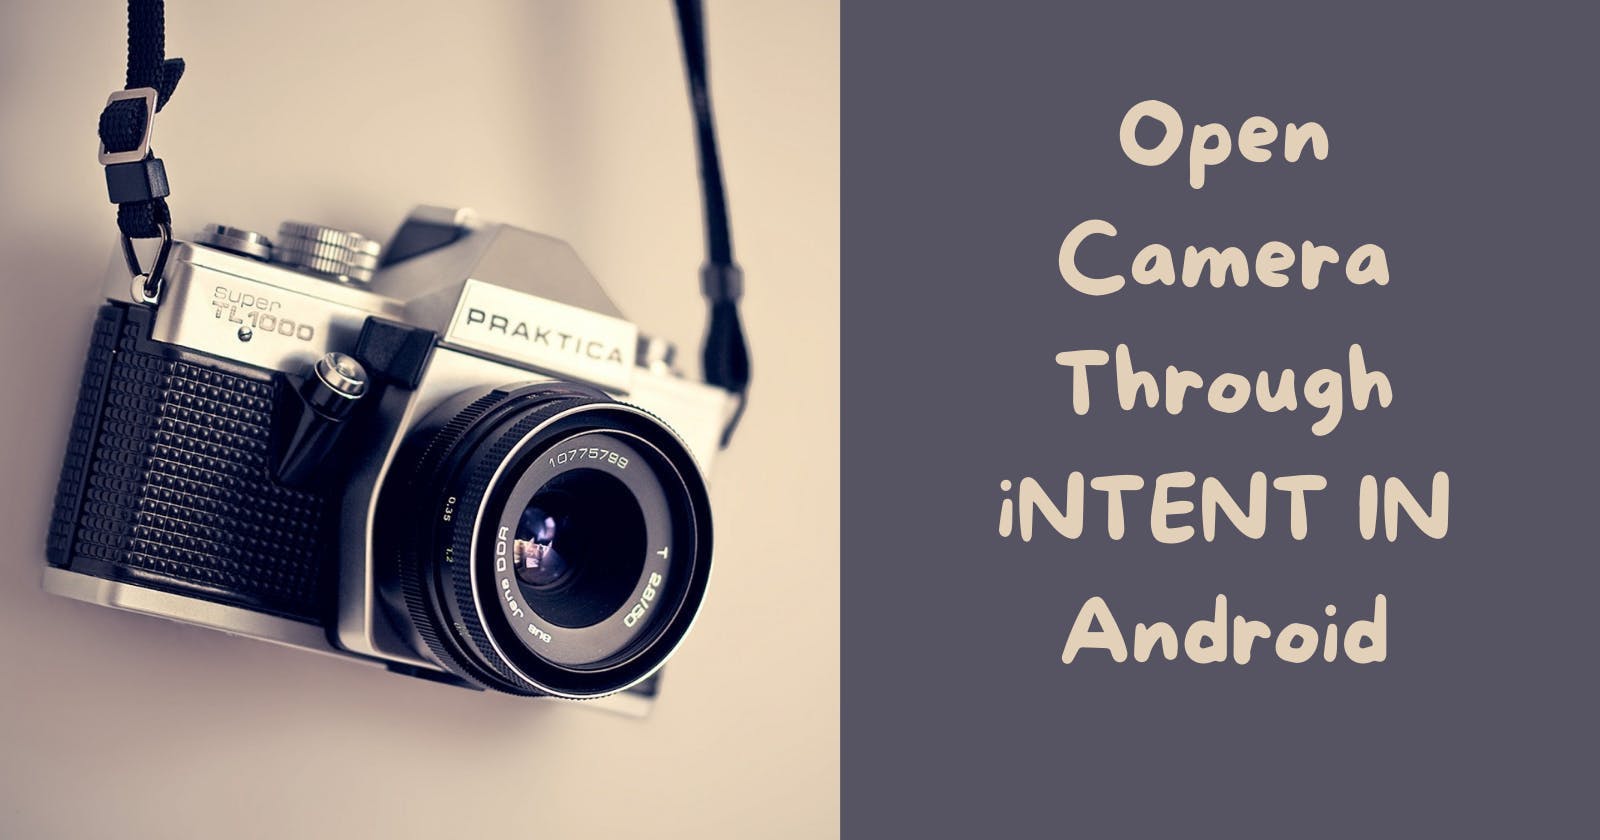 Open camera through intent in Android